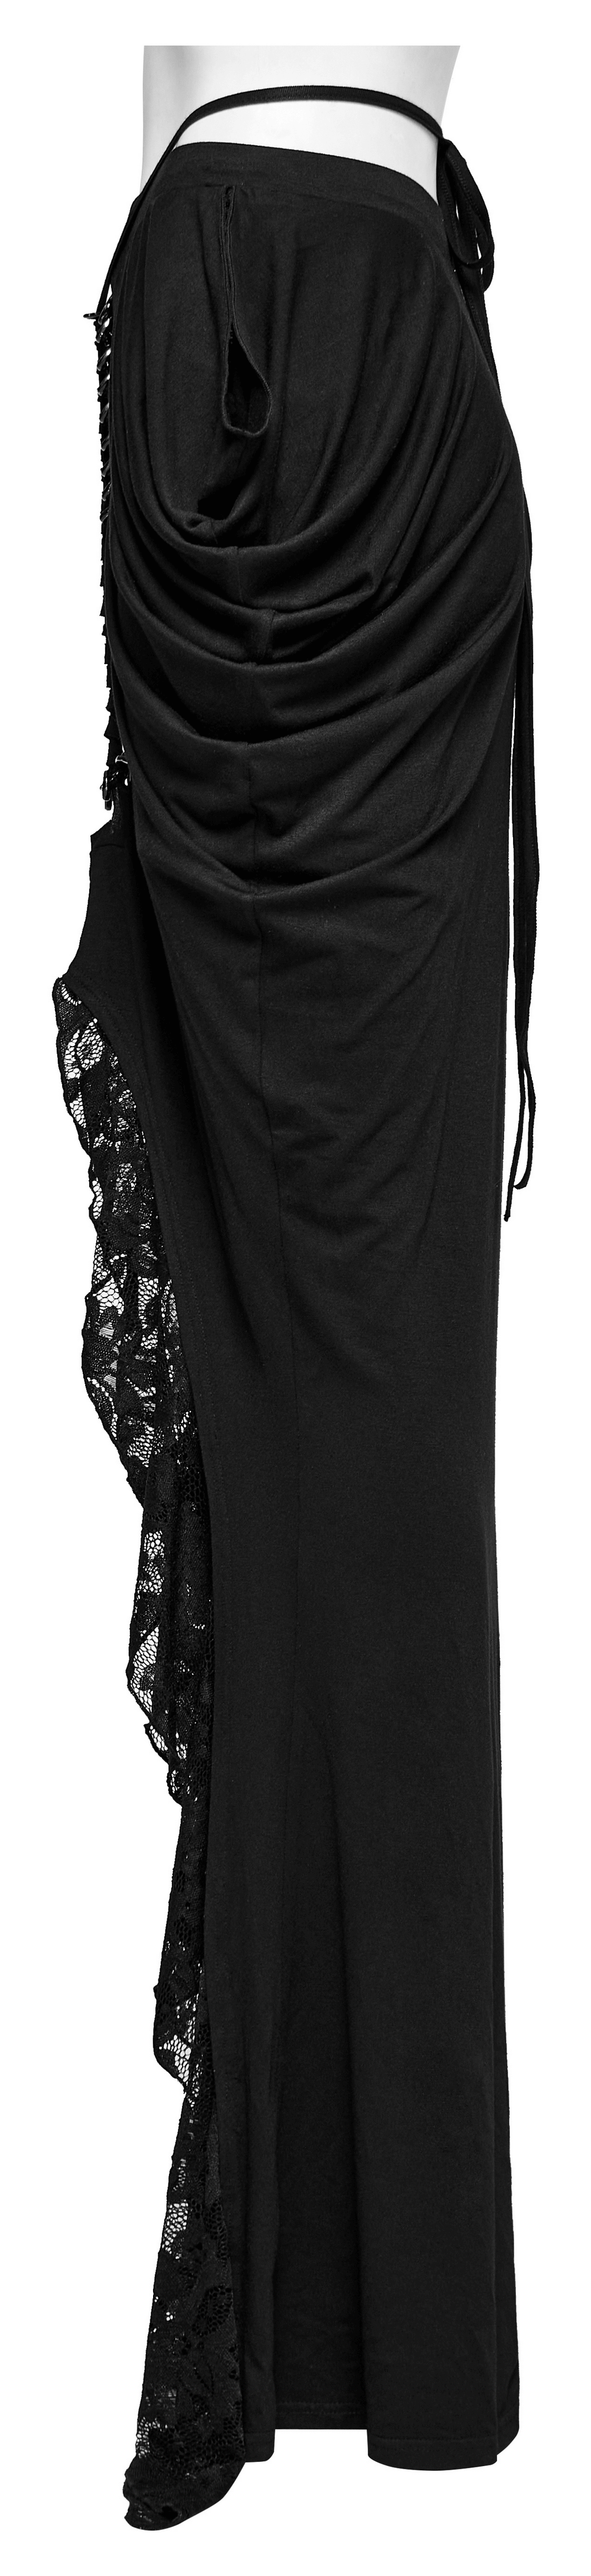 Elegant Lace and Chain Decorated Gothic Skirt